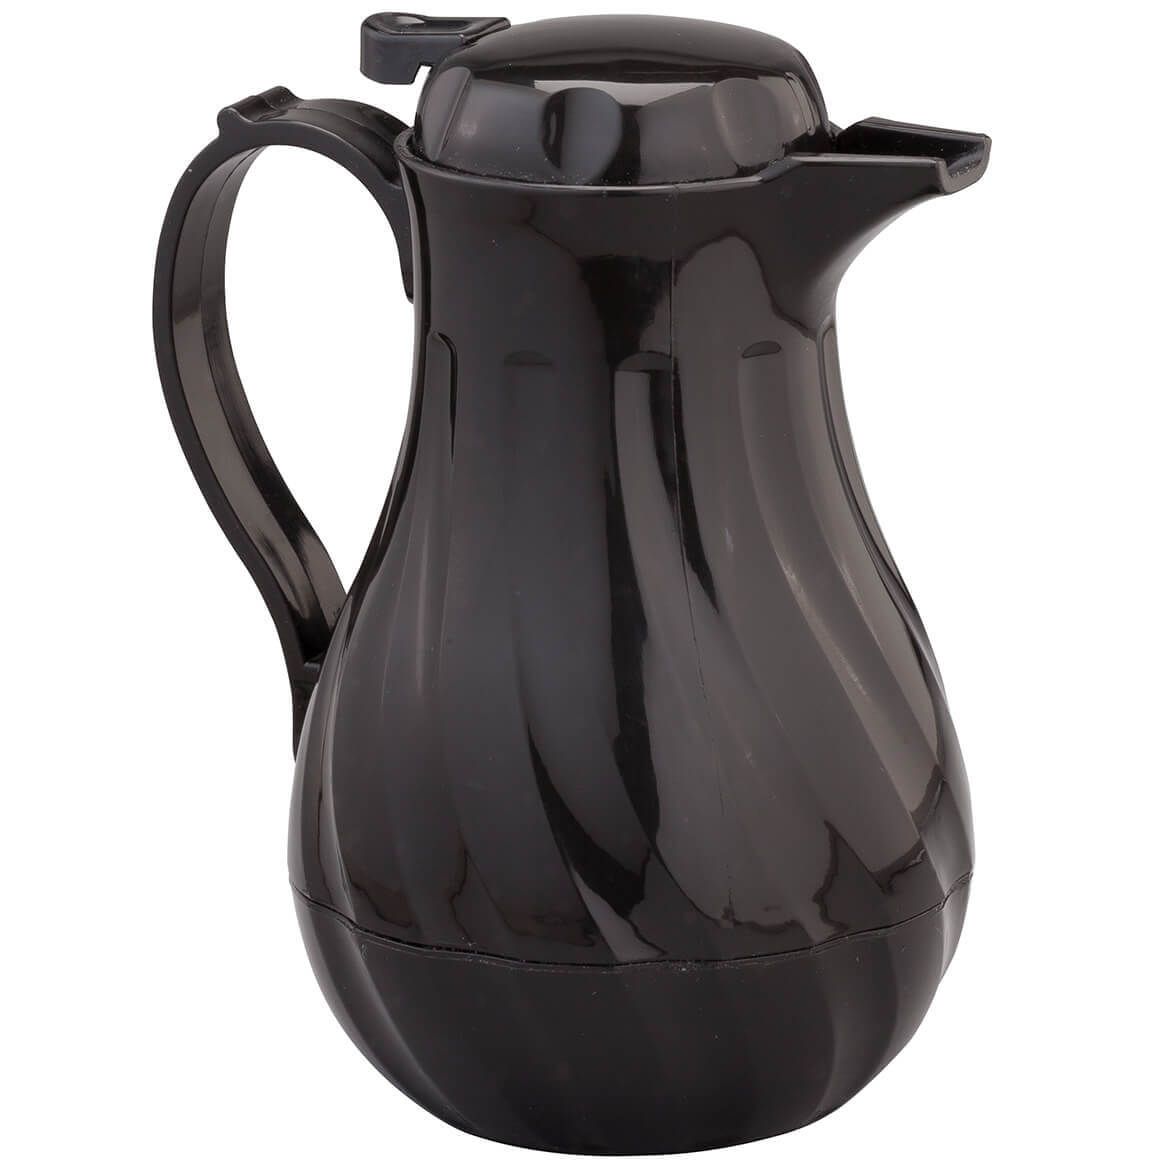 Insulated Coffee Carafe by Chef's Pride + '-' + 367656